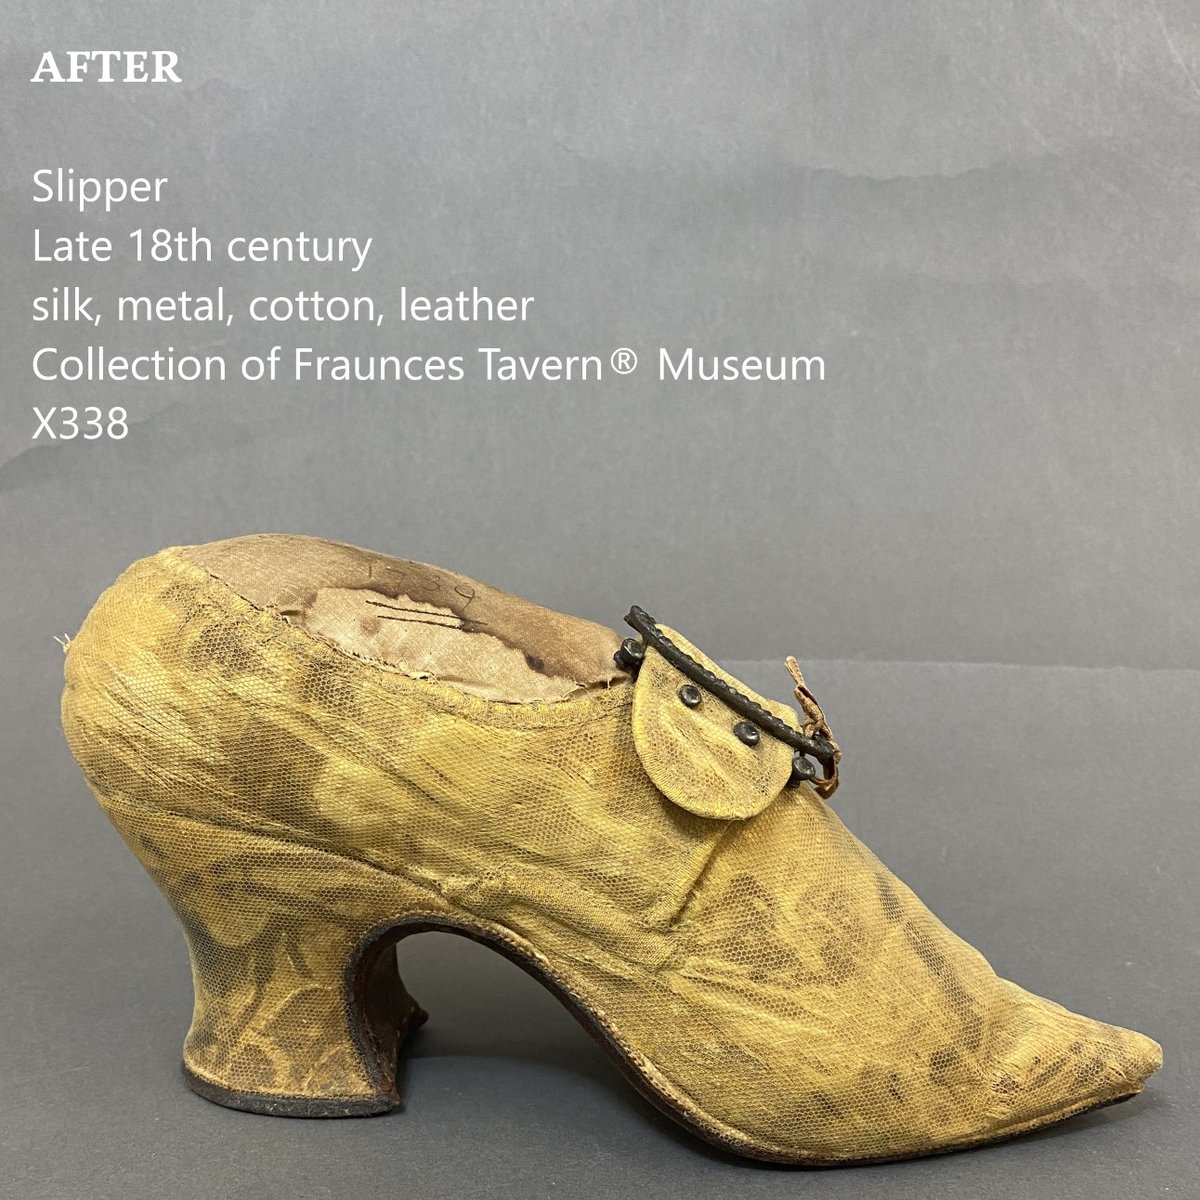 Thank you to @americanacorner , whose grant allowed us to conserve a ladies’ slipper that belonged to Martha Washington (1731-1802) who gifted it to Lady Mary Watts in 1789. Come view the slipper back on display in the McEntee Gallery on the 3rd floor of the Museum!